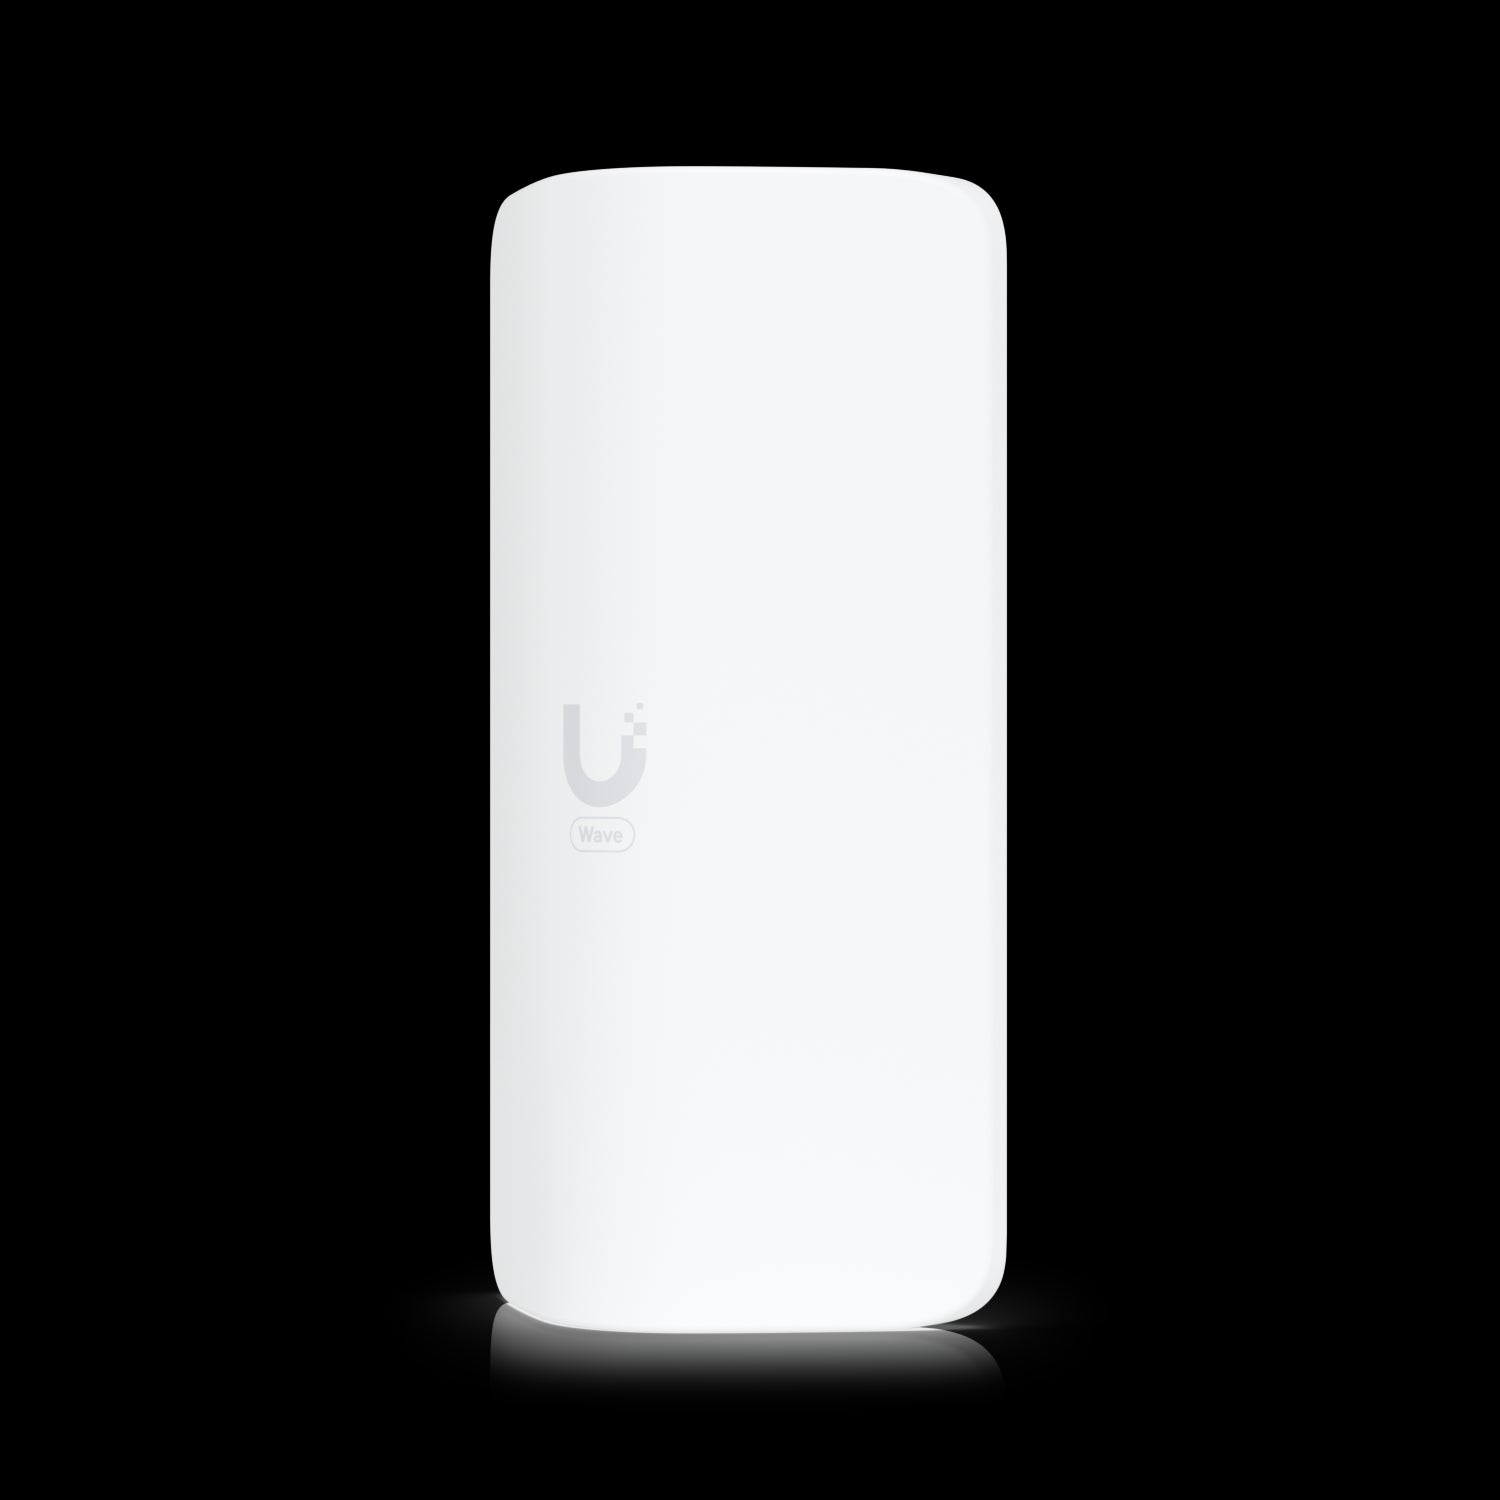 Ubiquiti Wave AP Micro. Wide-coverage 60 GHz PtMP access point powered by Wave Technology.